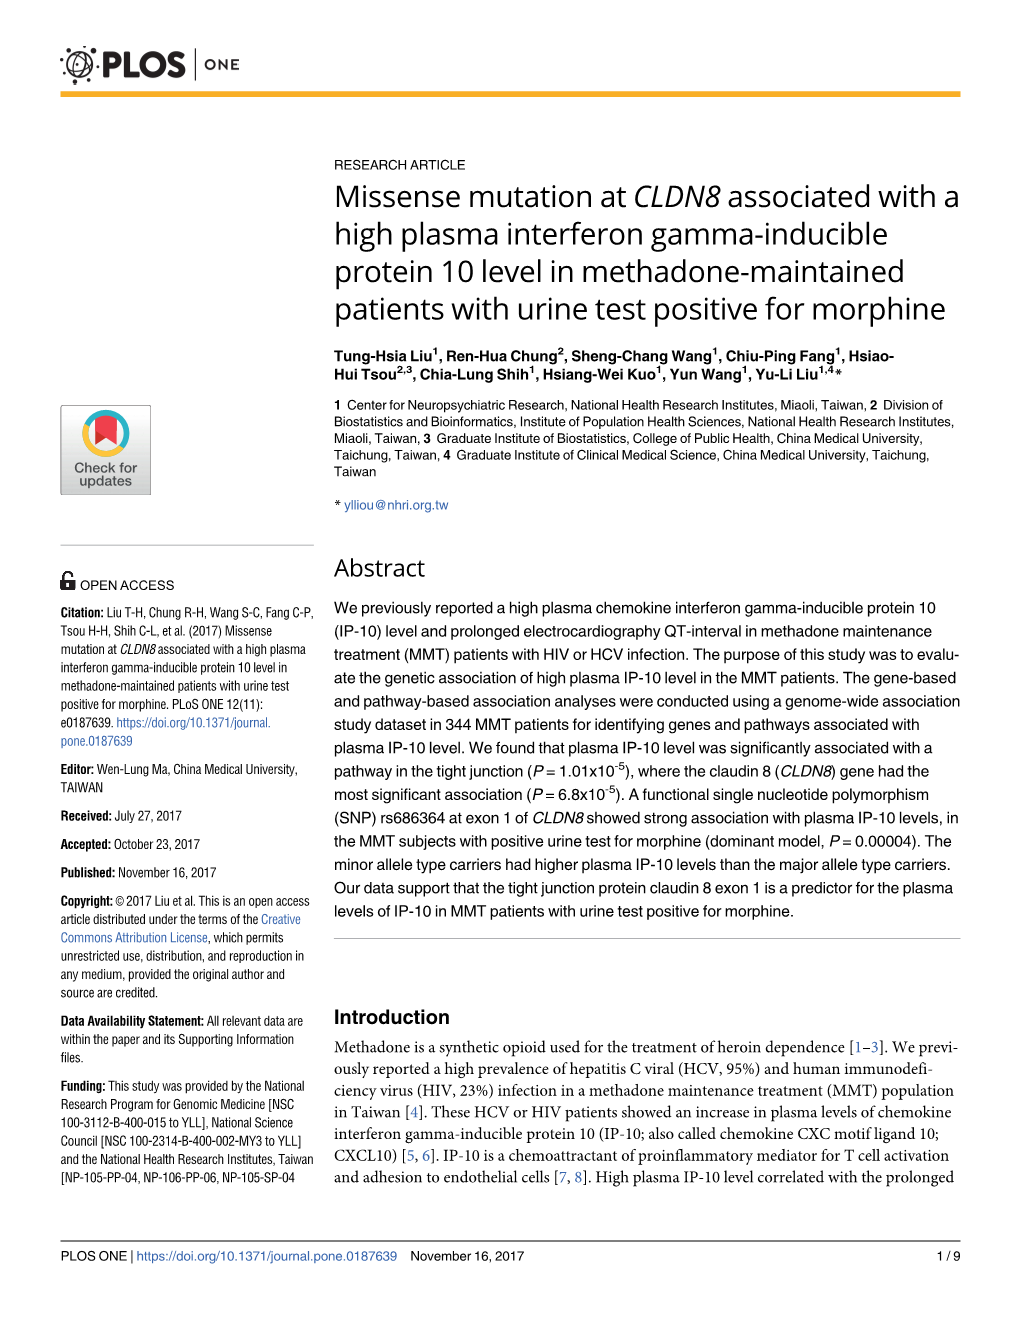 Missense Mutation at CLDN8 Associated with a High Plasma